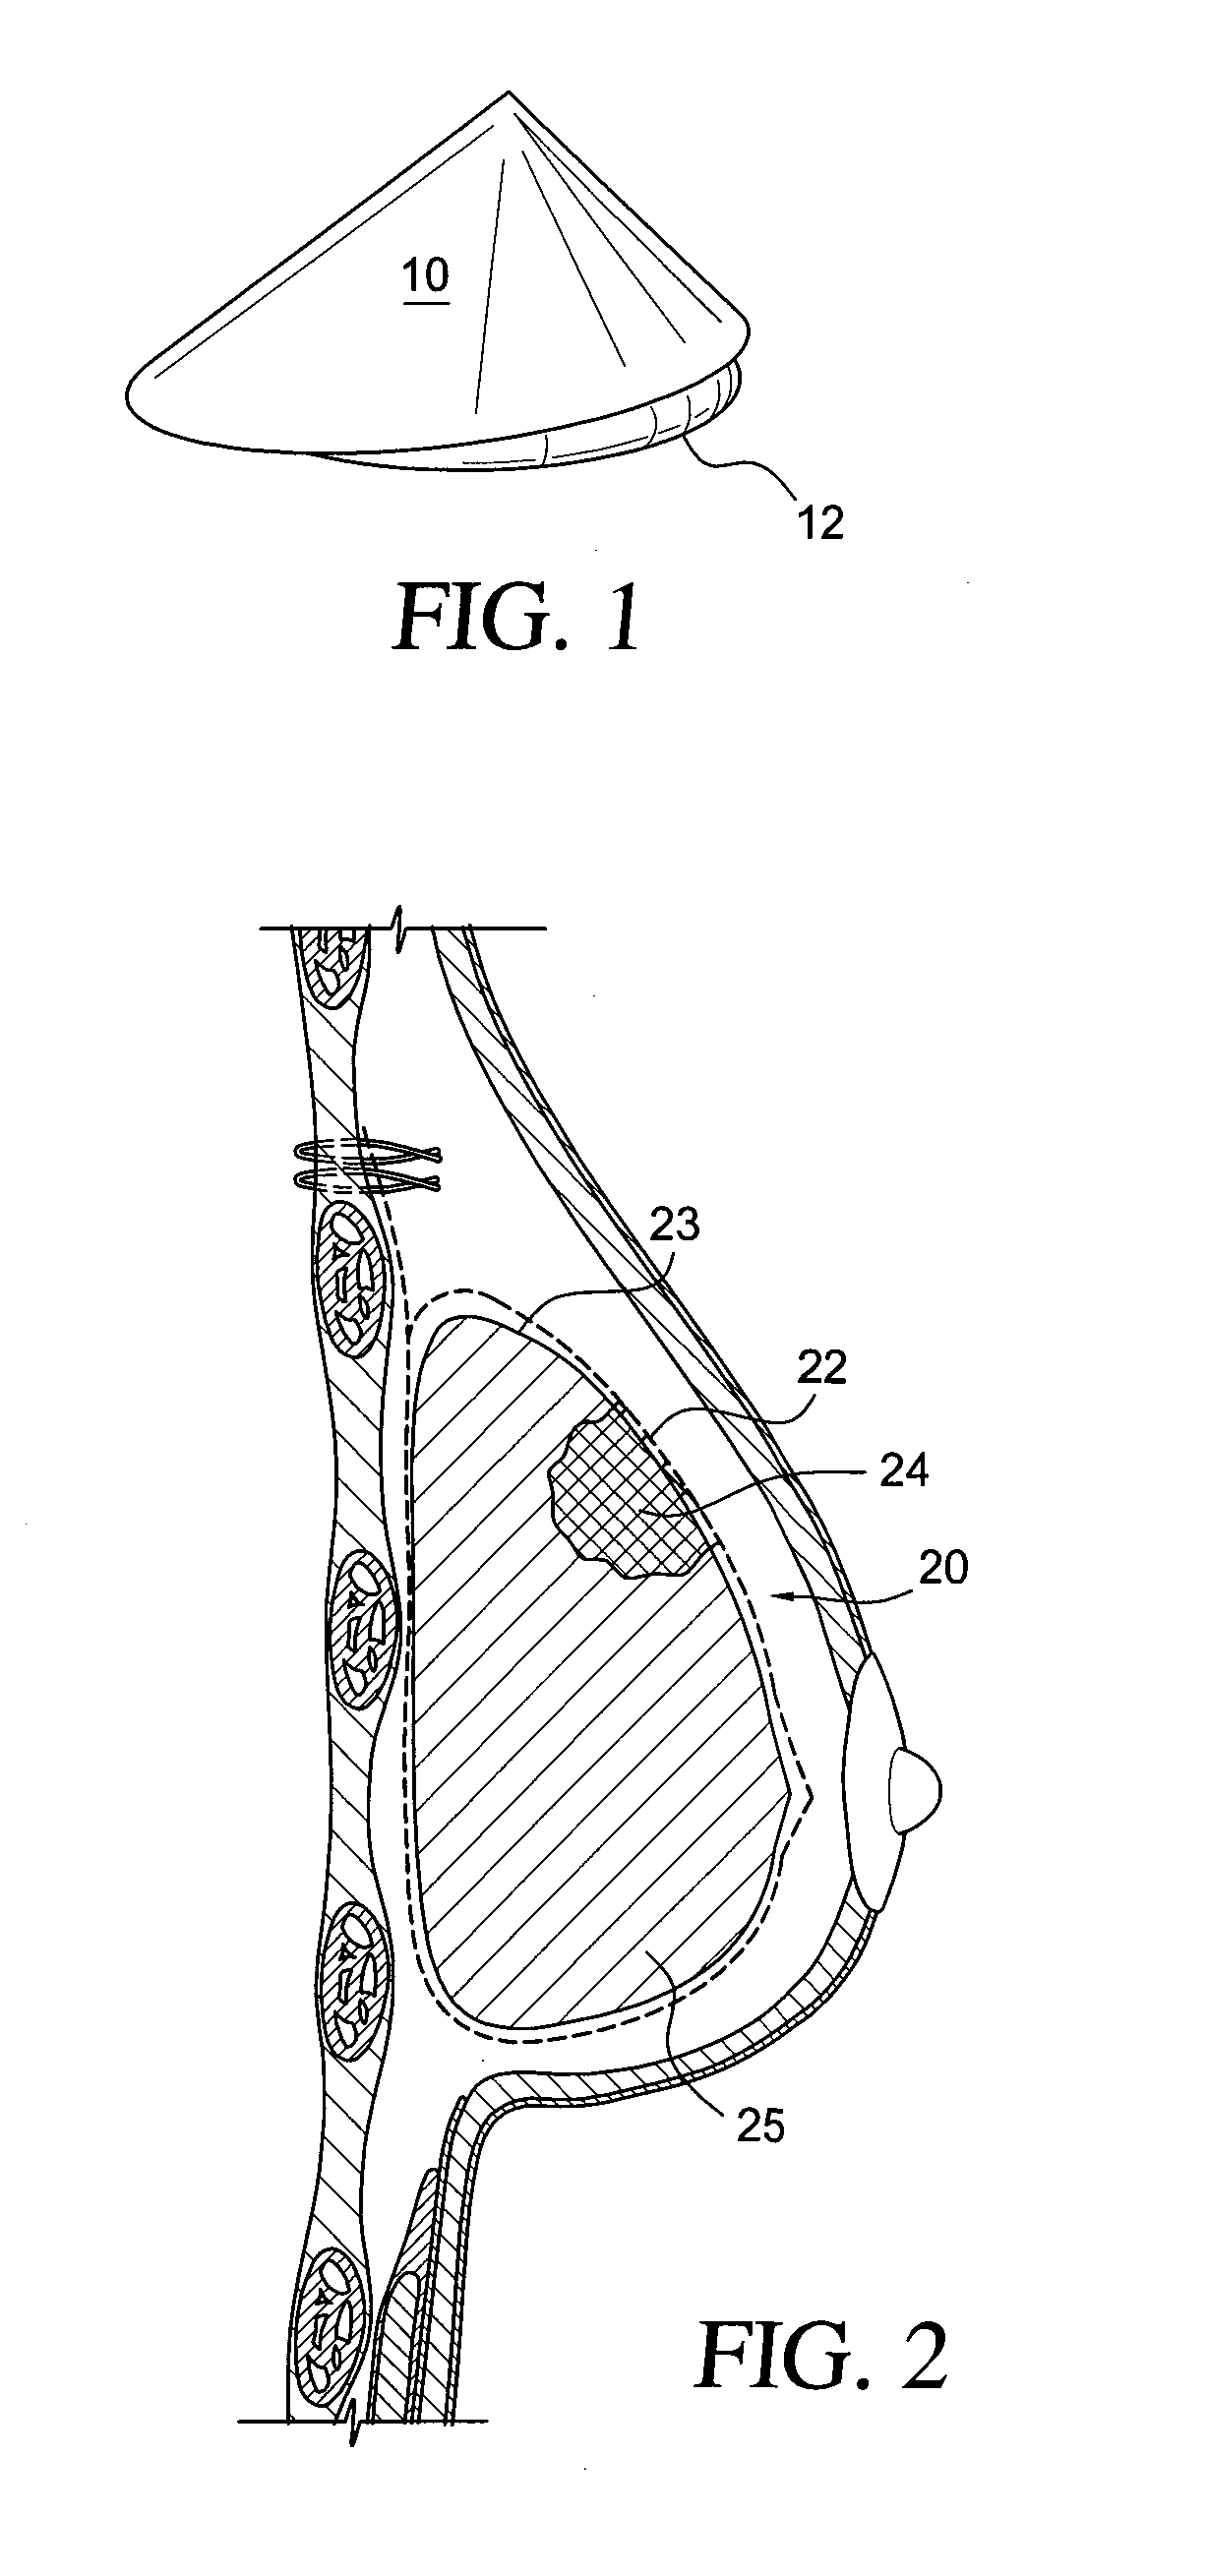 Self supporting implant in a human body and method for making the same without capsular contracture